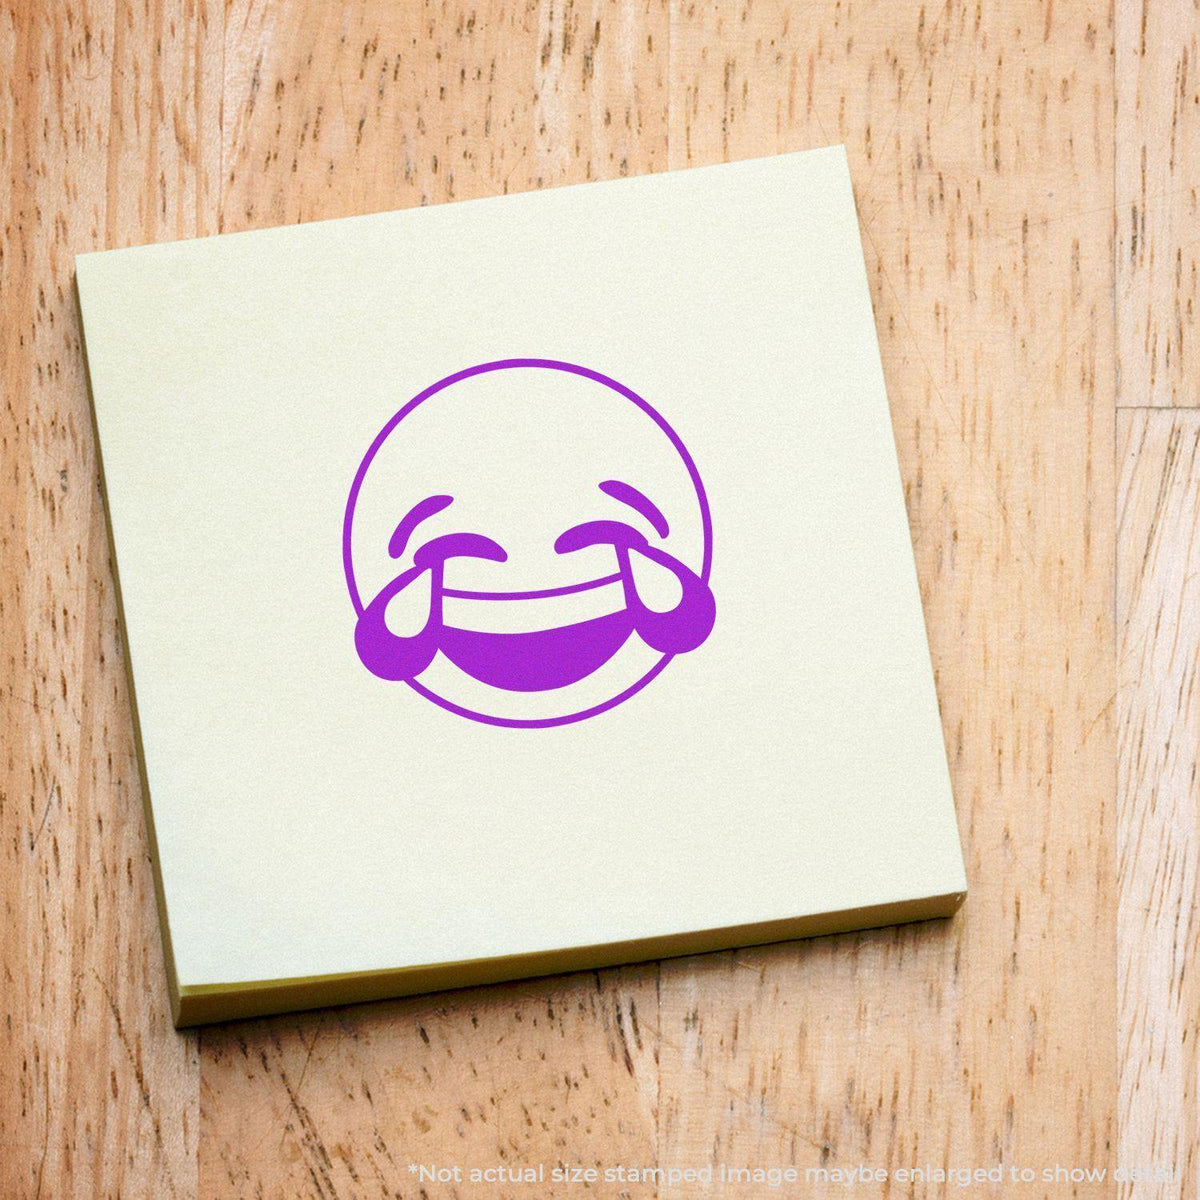 Round Laughing Smiley Rubber Stamp - Engineer Seal Stamps - Brand_Acorn, Impression Size_Small, Stamp Type_Regular Stamp, Type of Use_General, Type of Use_Teacher